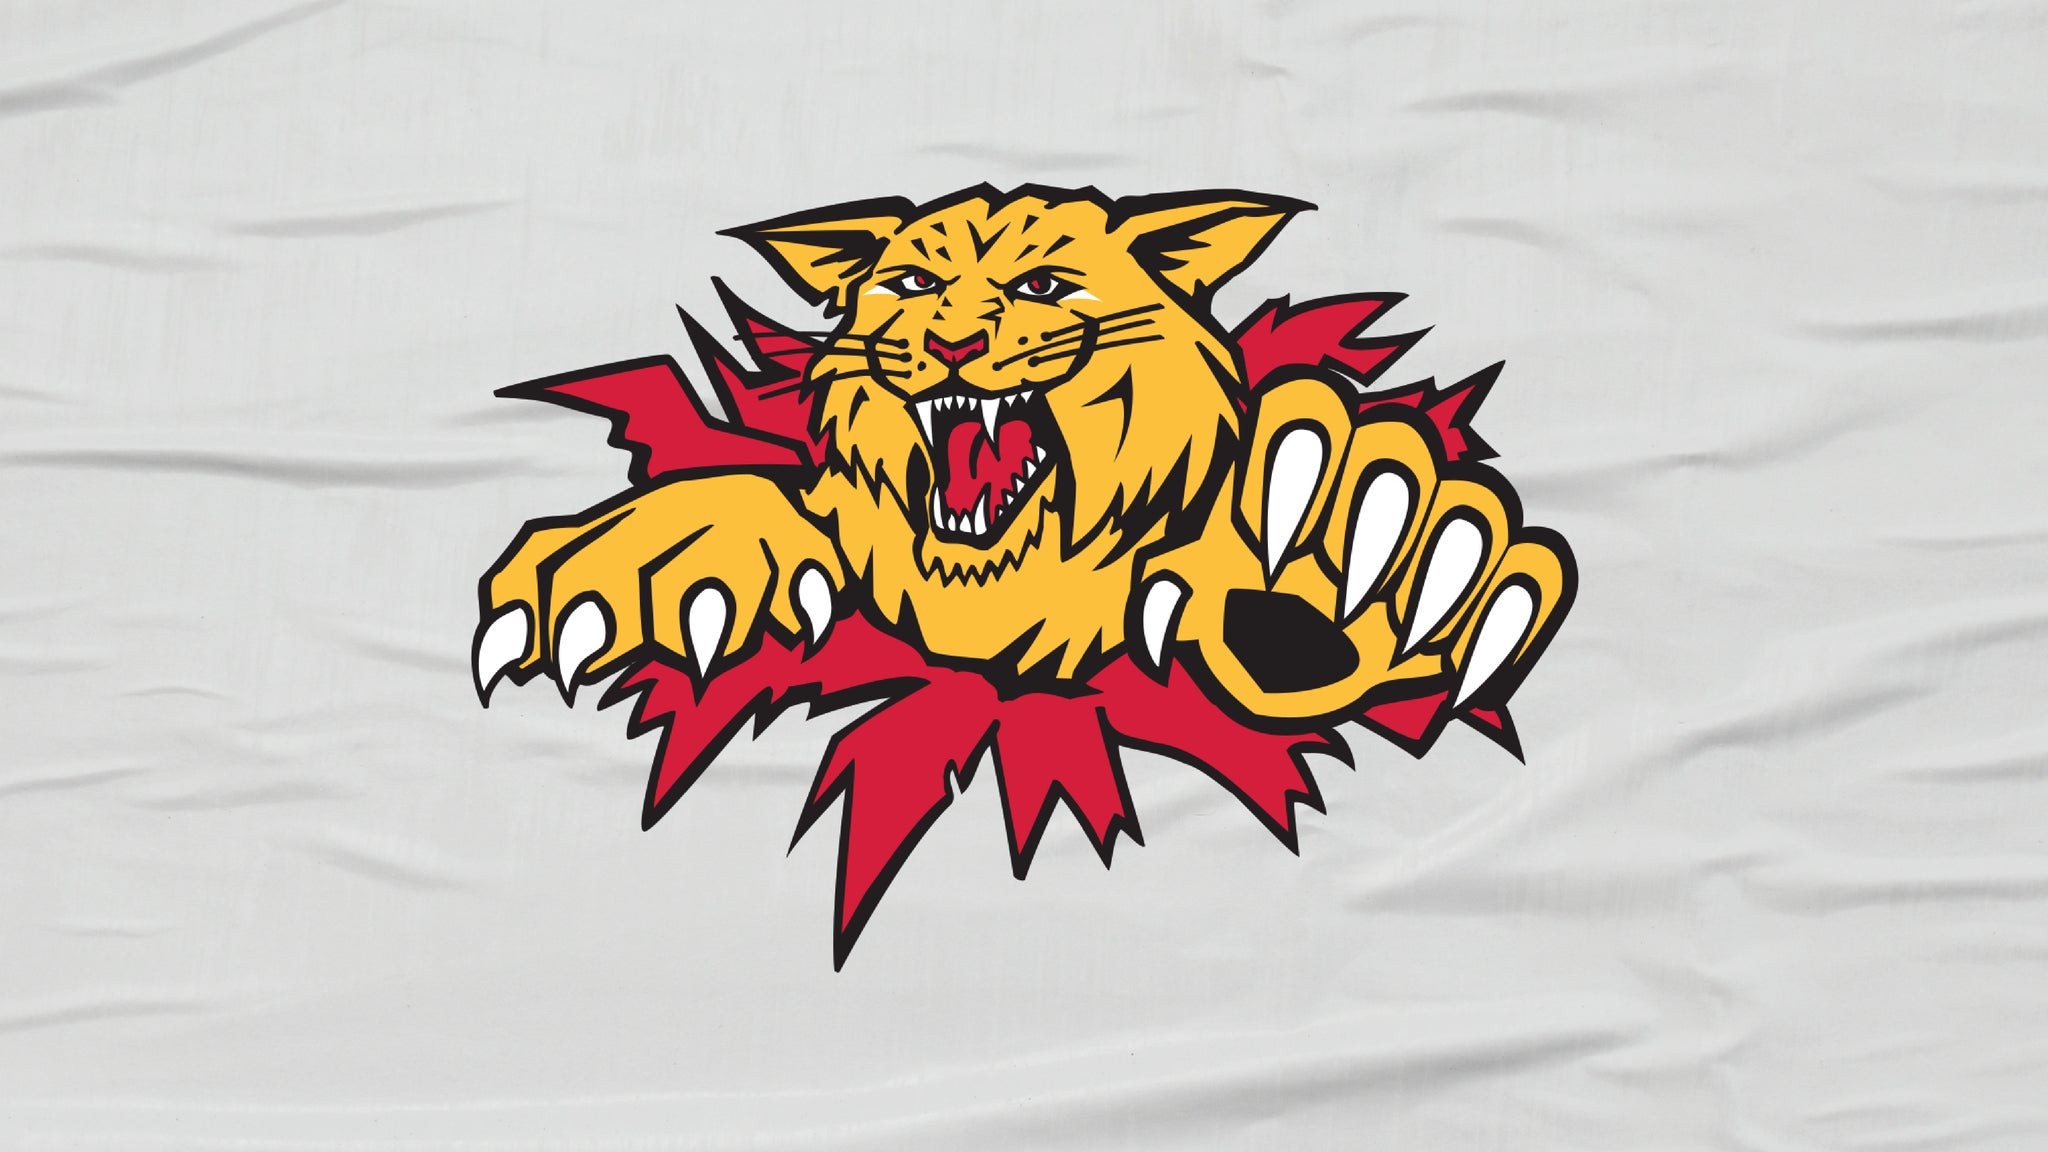 Moncton Wildcats vs. Sagueneens De Chicoutimi in Moncton promo photo for Family 4 Pack presale offer code